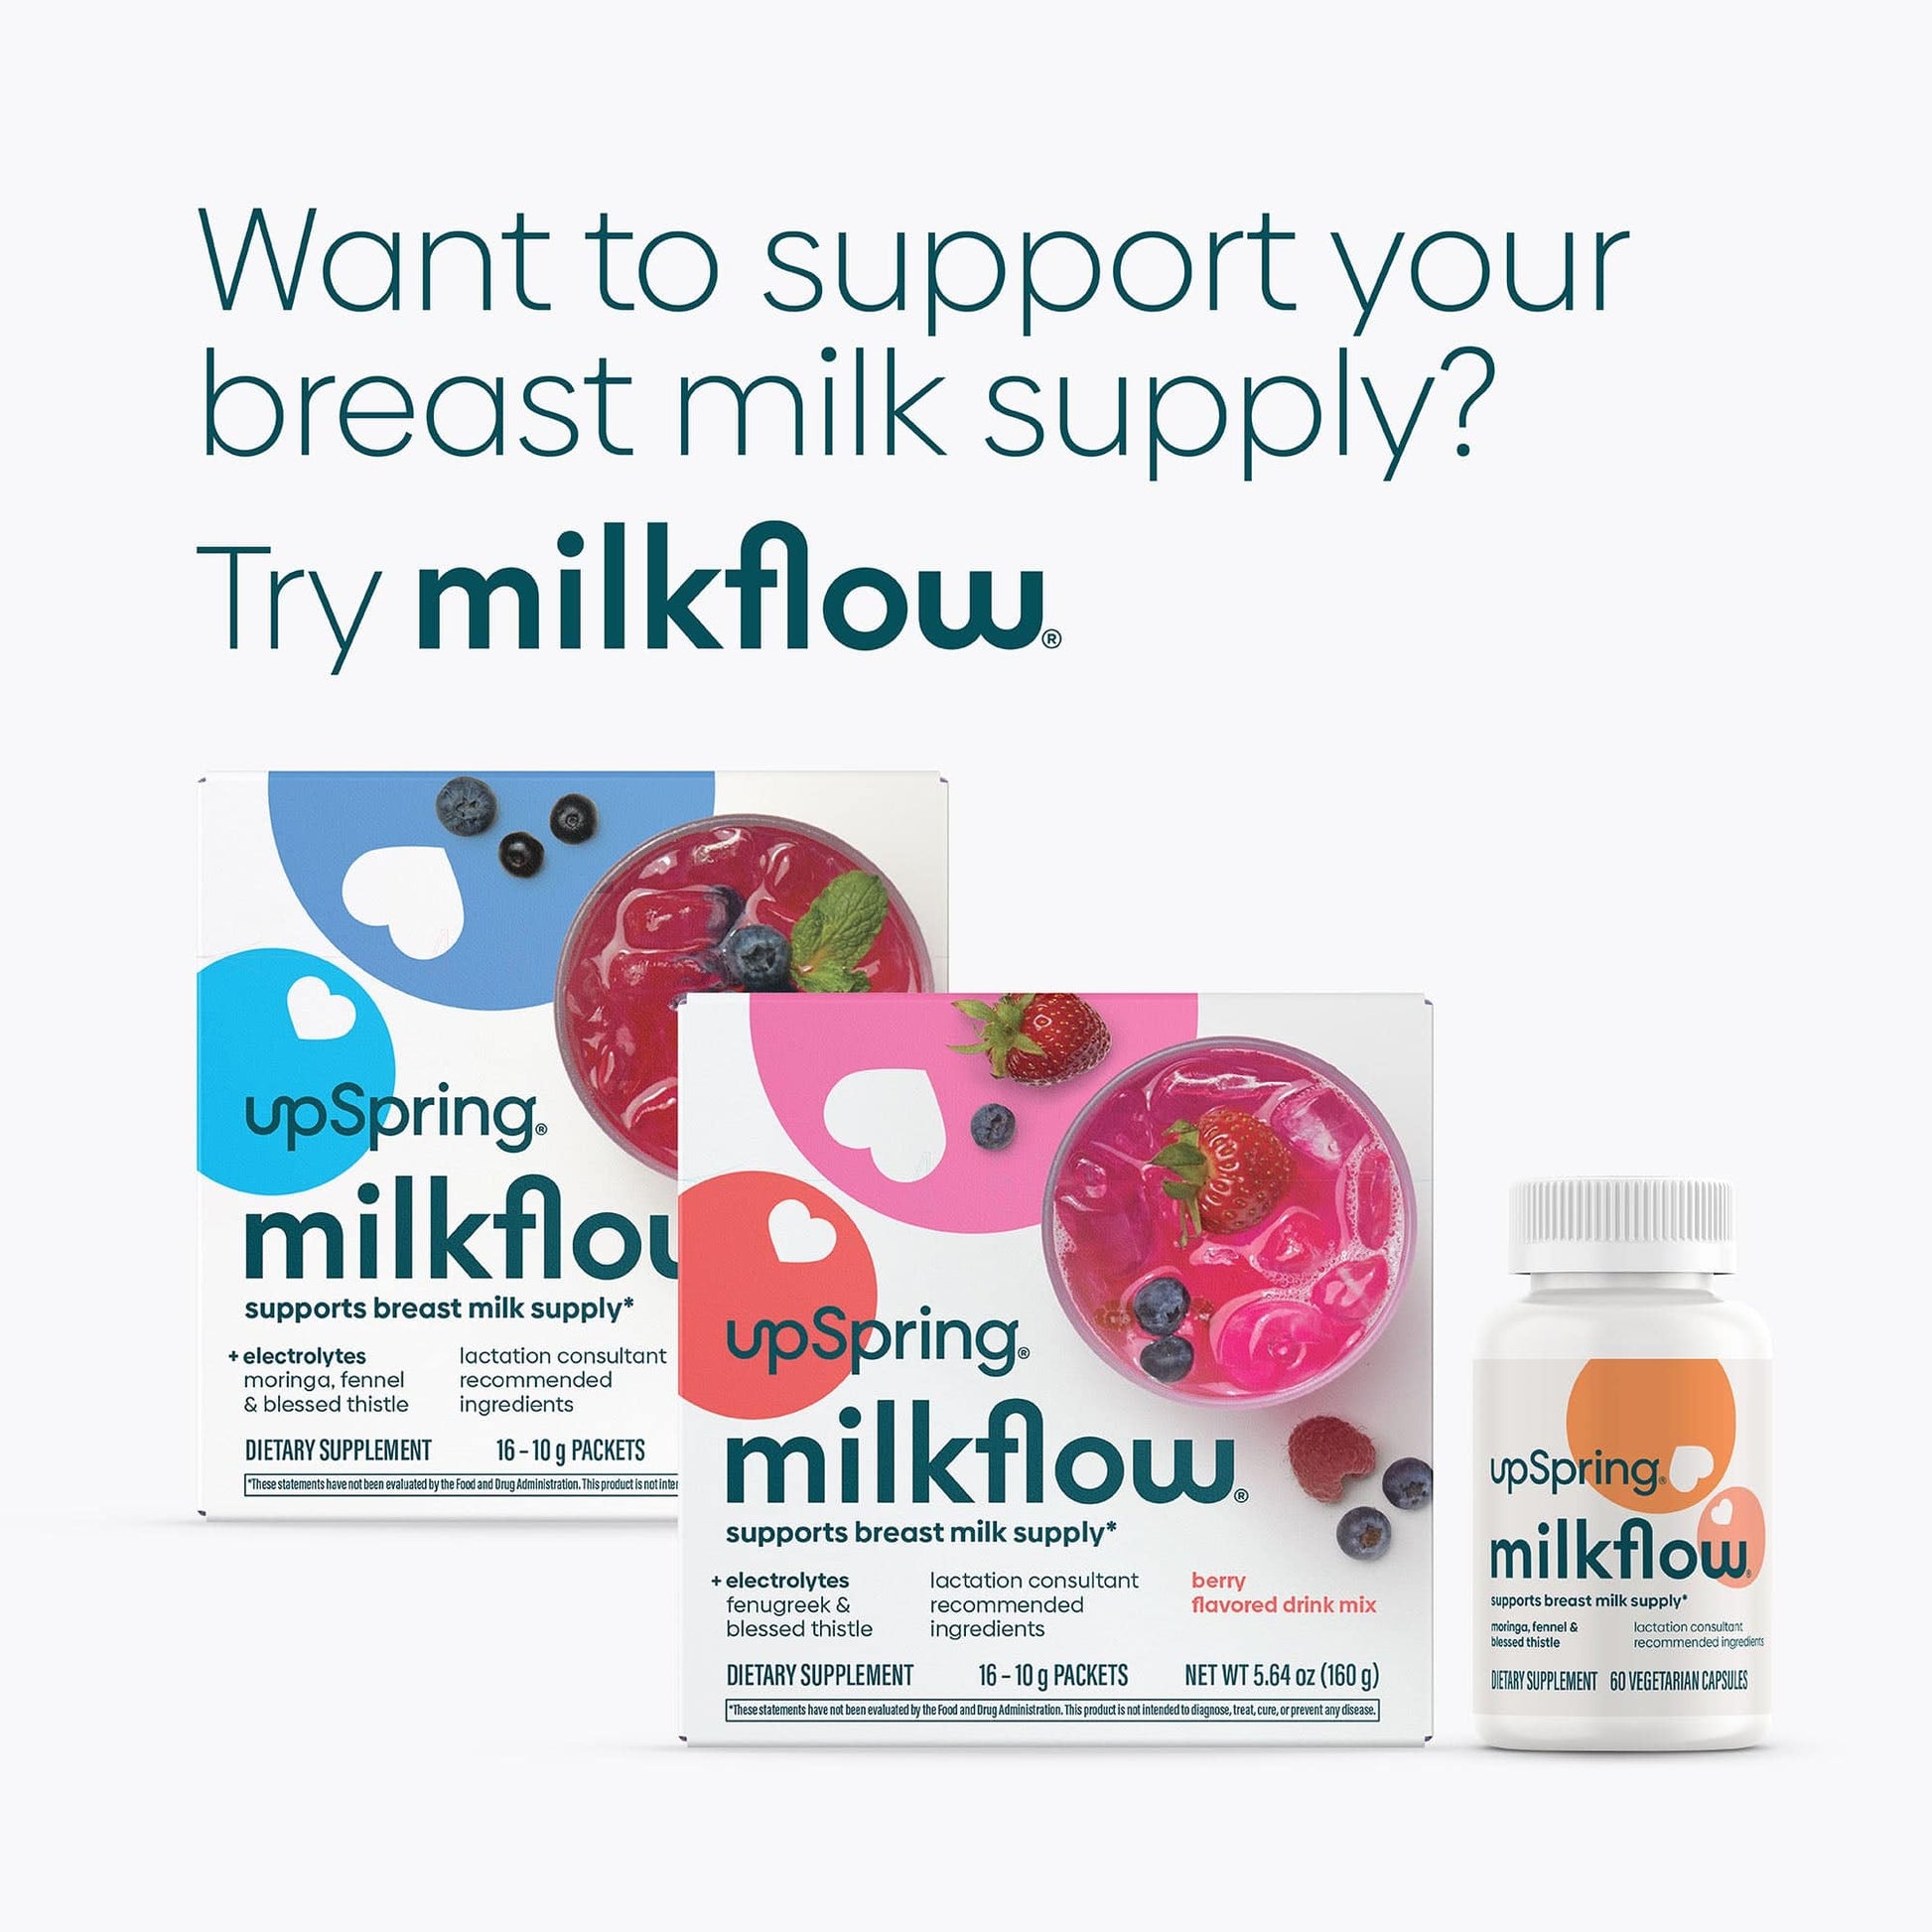 Images of MilkFlow products to support breast milk supply